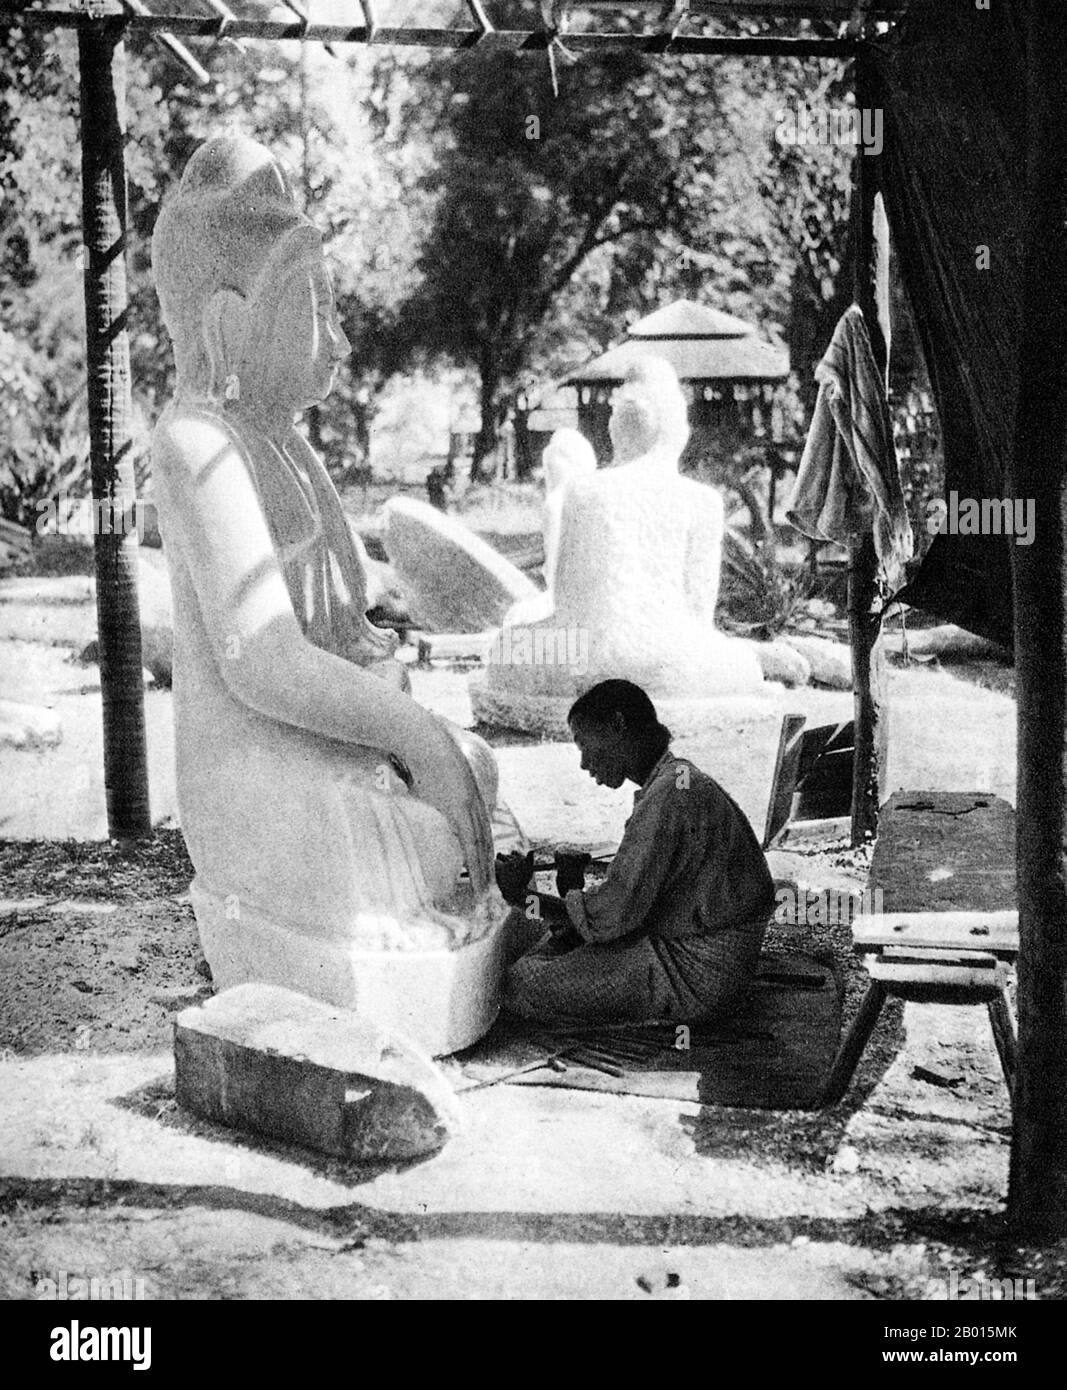 Burma/Myanmar: A sculptor carves a Buddha statue from marble in Prome, lower Burma, c. 1920s.  Legend attributes the first Buddhist doctrine in Burma to 228 BCE when Sohn Uttar Sthavira, one of the royal monks to Emperor Ashoka the Great of India, came to the country with other monks and sacred texts. However, the era of Buddhism truly began in the 11th century after King Anawrahta of Pagan (Bagan) was converted to Theravada Buddhism. Today, 89% of the population of Burma is Theravada Buddhist.  Prome, renamed Pyay, is a town in Pegu (Bago) Division in lower Burma, located on the Irrawaddy. Stock Photo